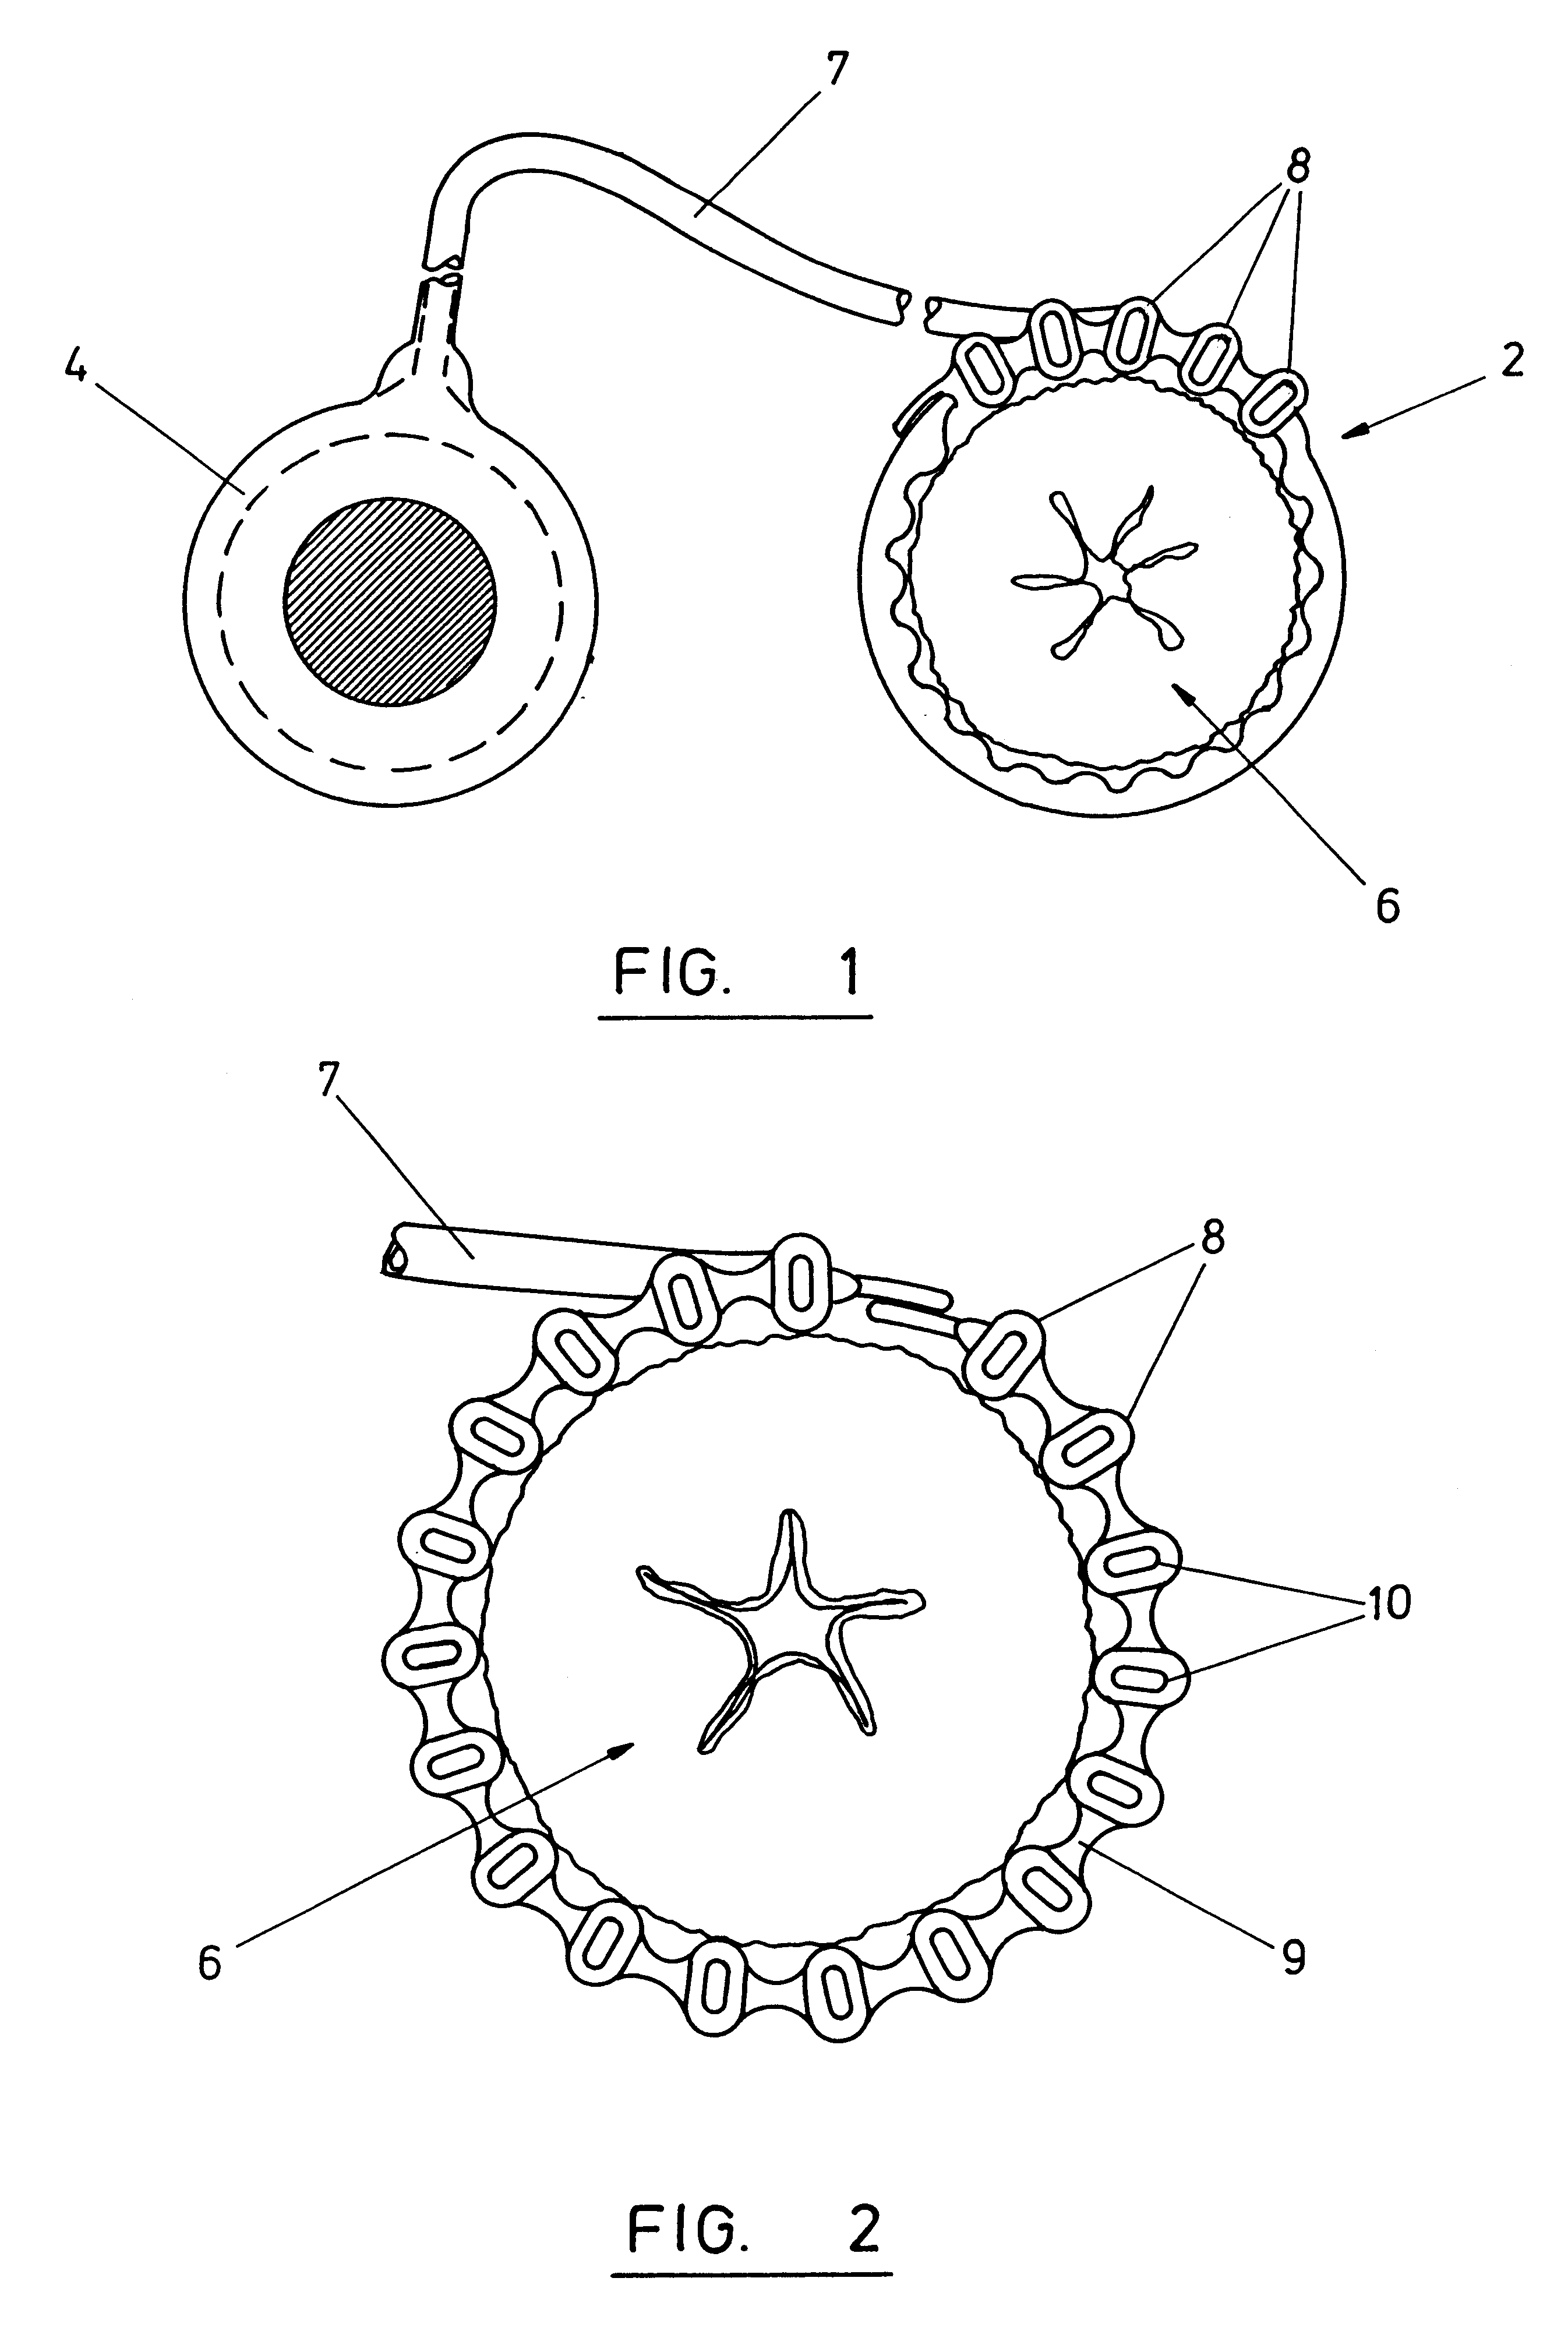 Urinary sphincter control device